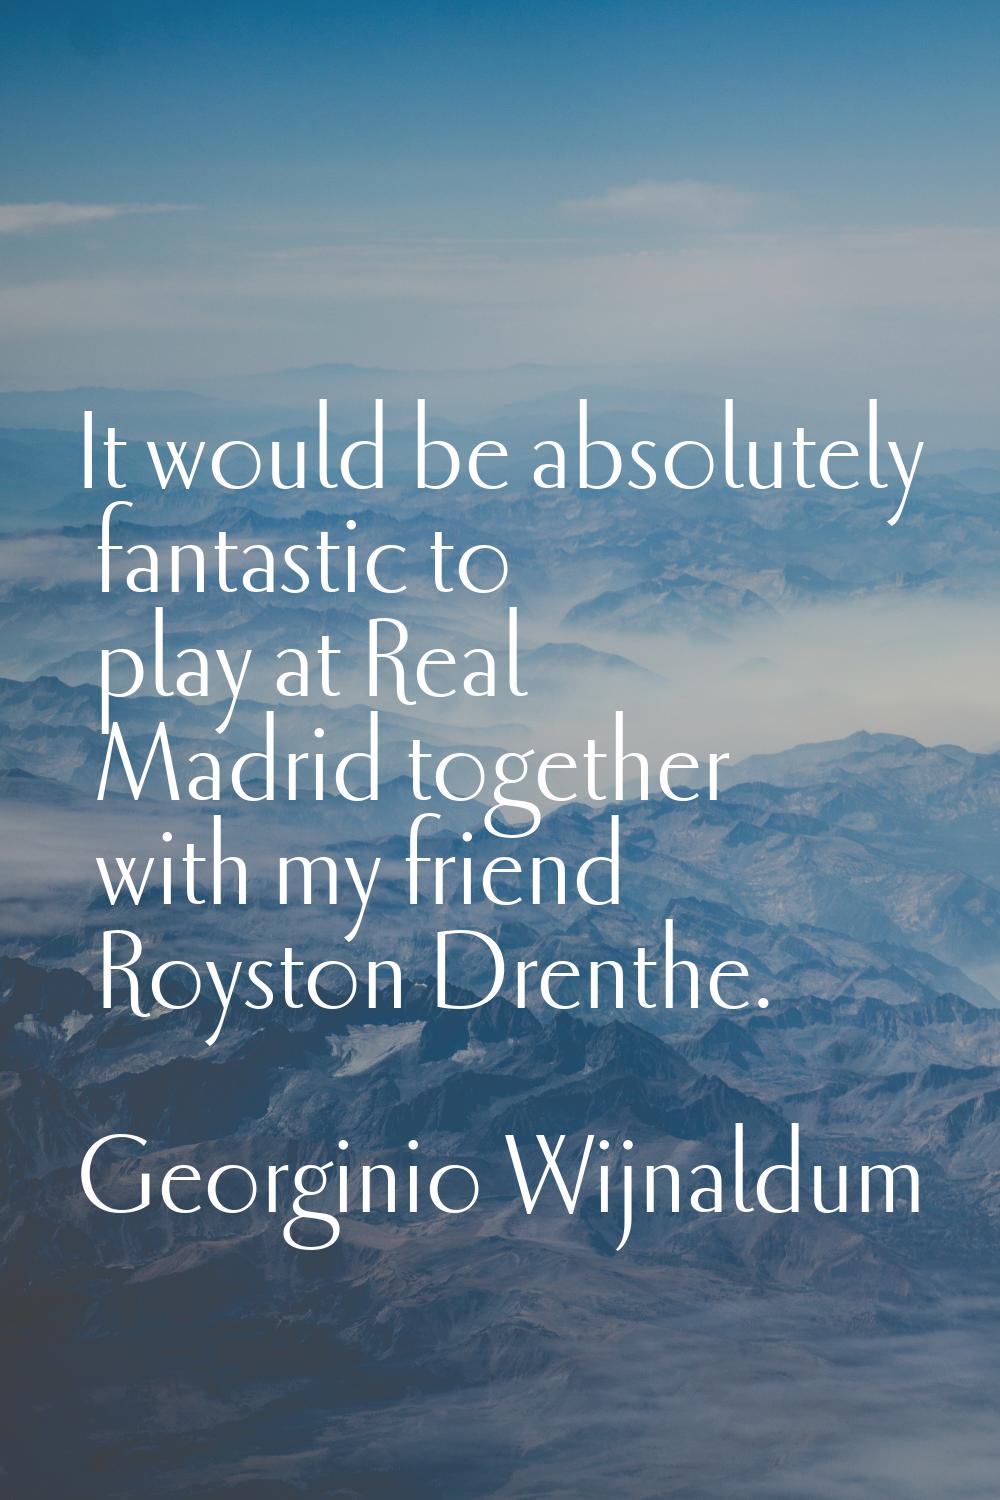 It would be absolutely fantastic to play at Real Madrid together with my friend Royston Drenthe.